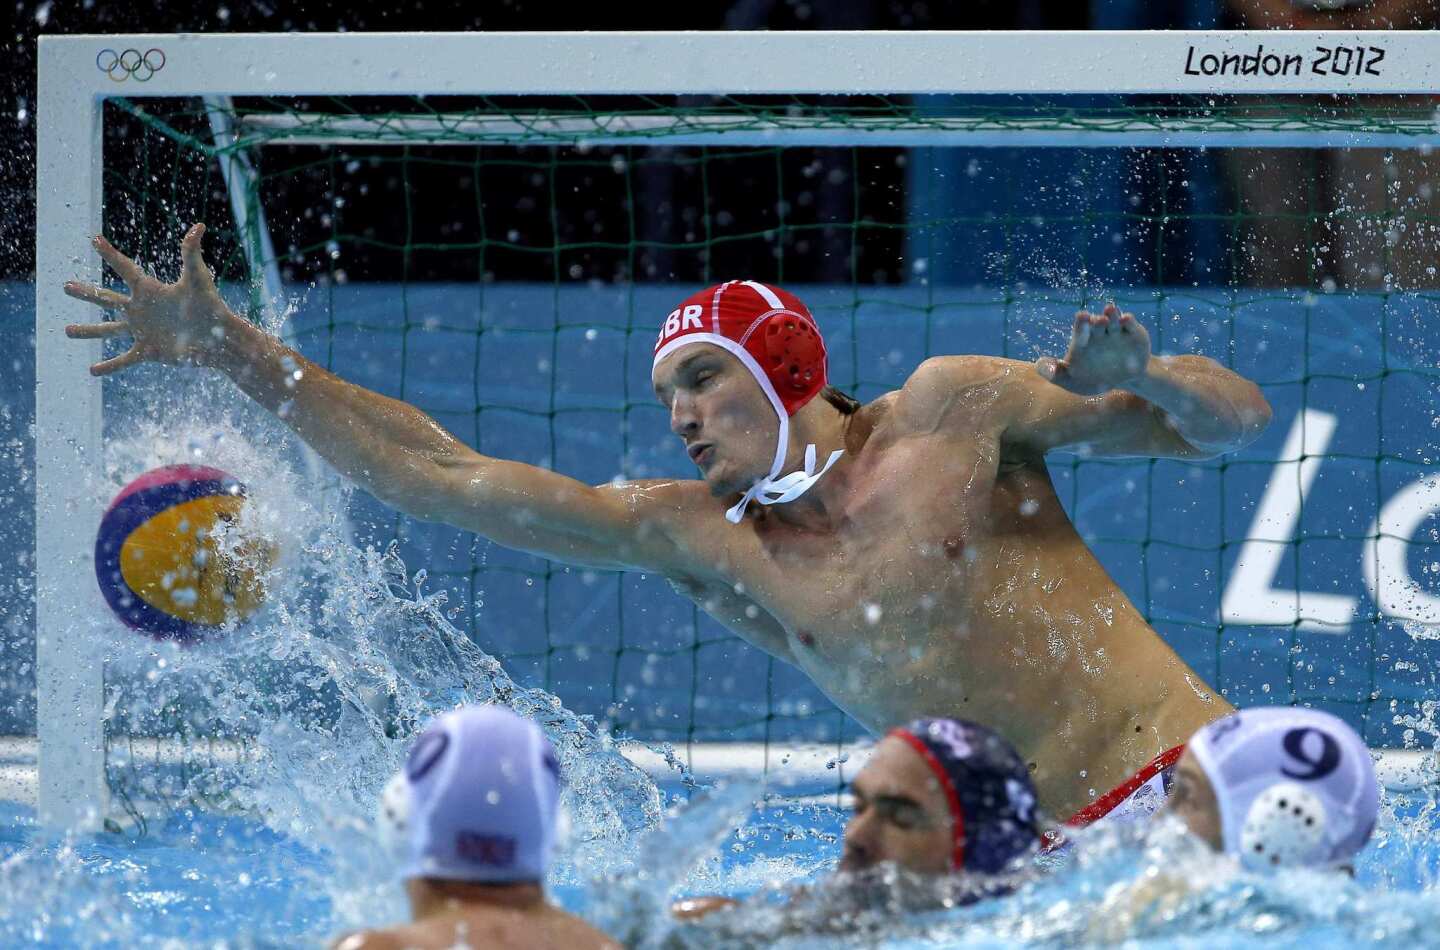 Ed Scott of Great Britain is unable to stop a shot by Anthony Azevedo of the United States during a preliminary men's water polo match.